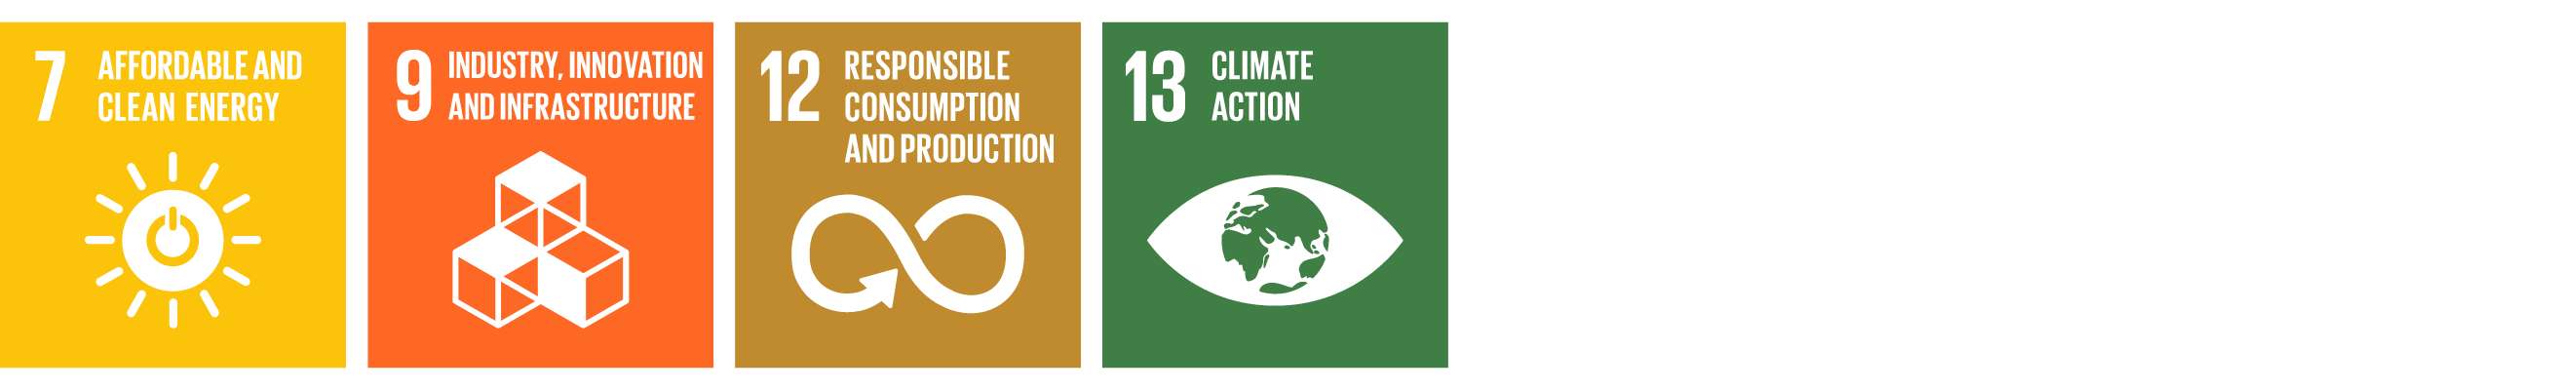 Image United Nations Sustainable Development Goals related to this content.